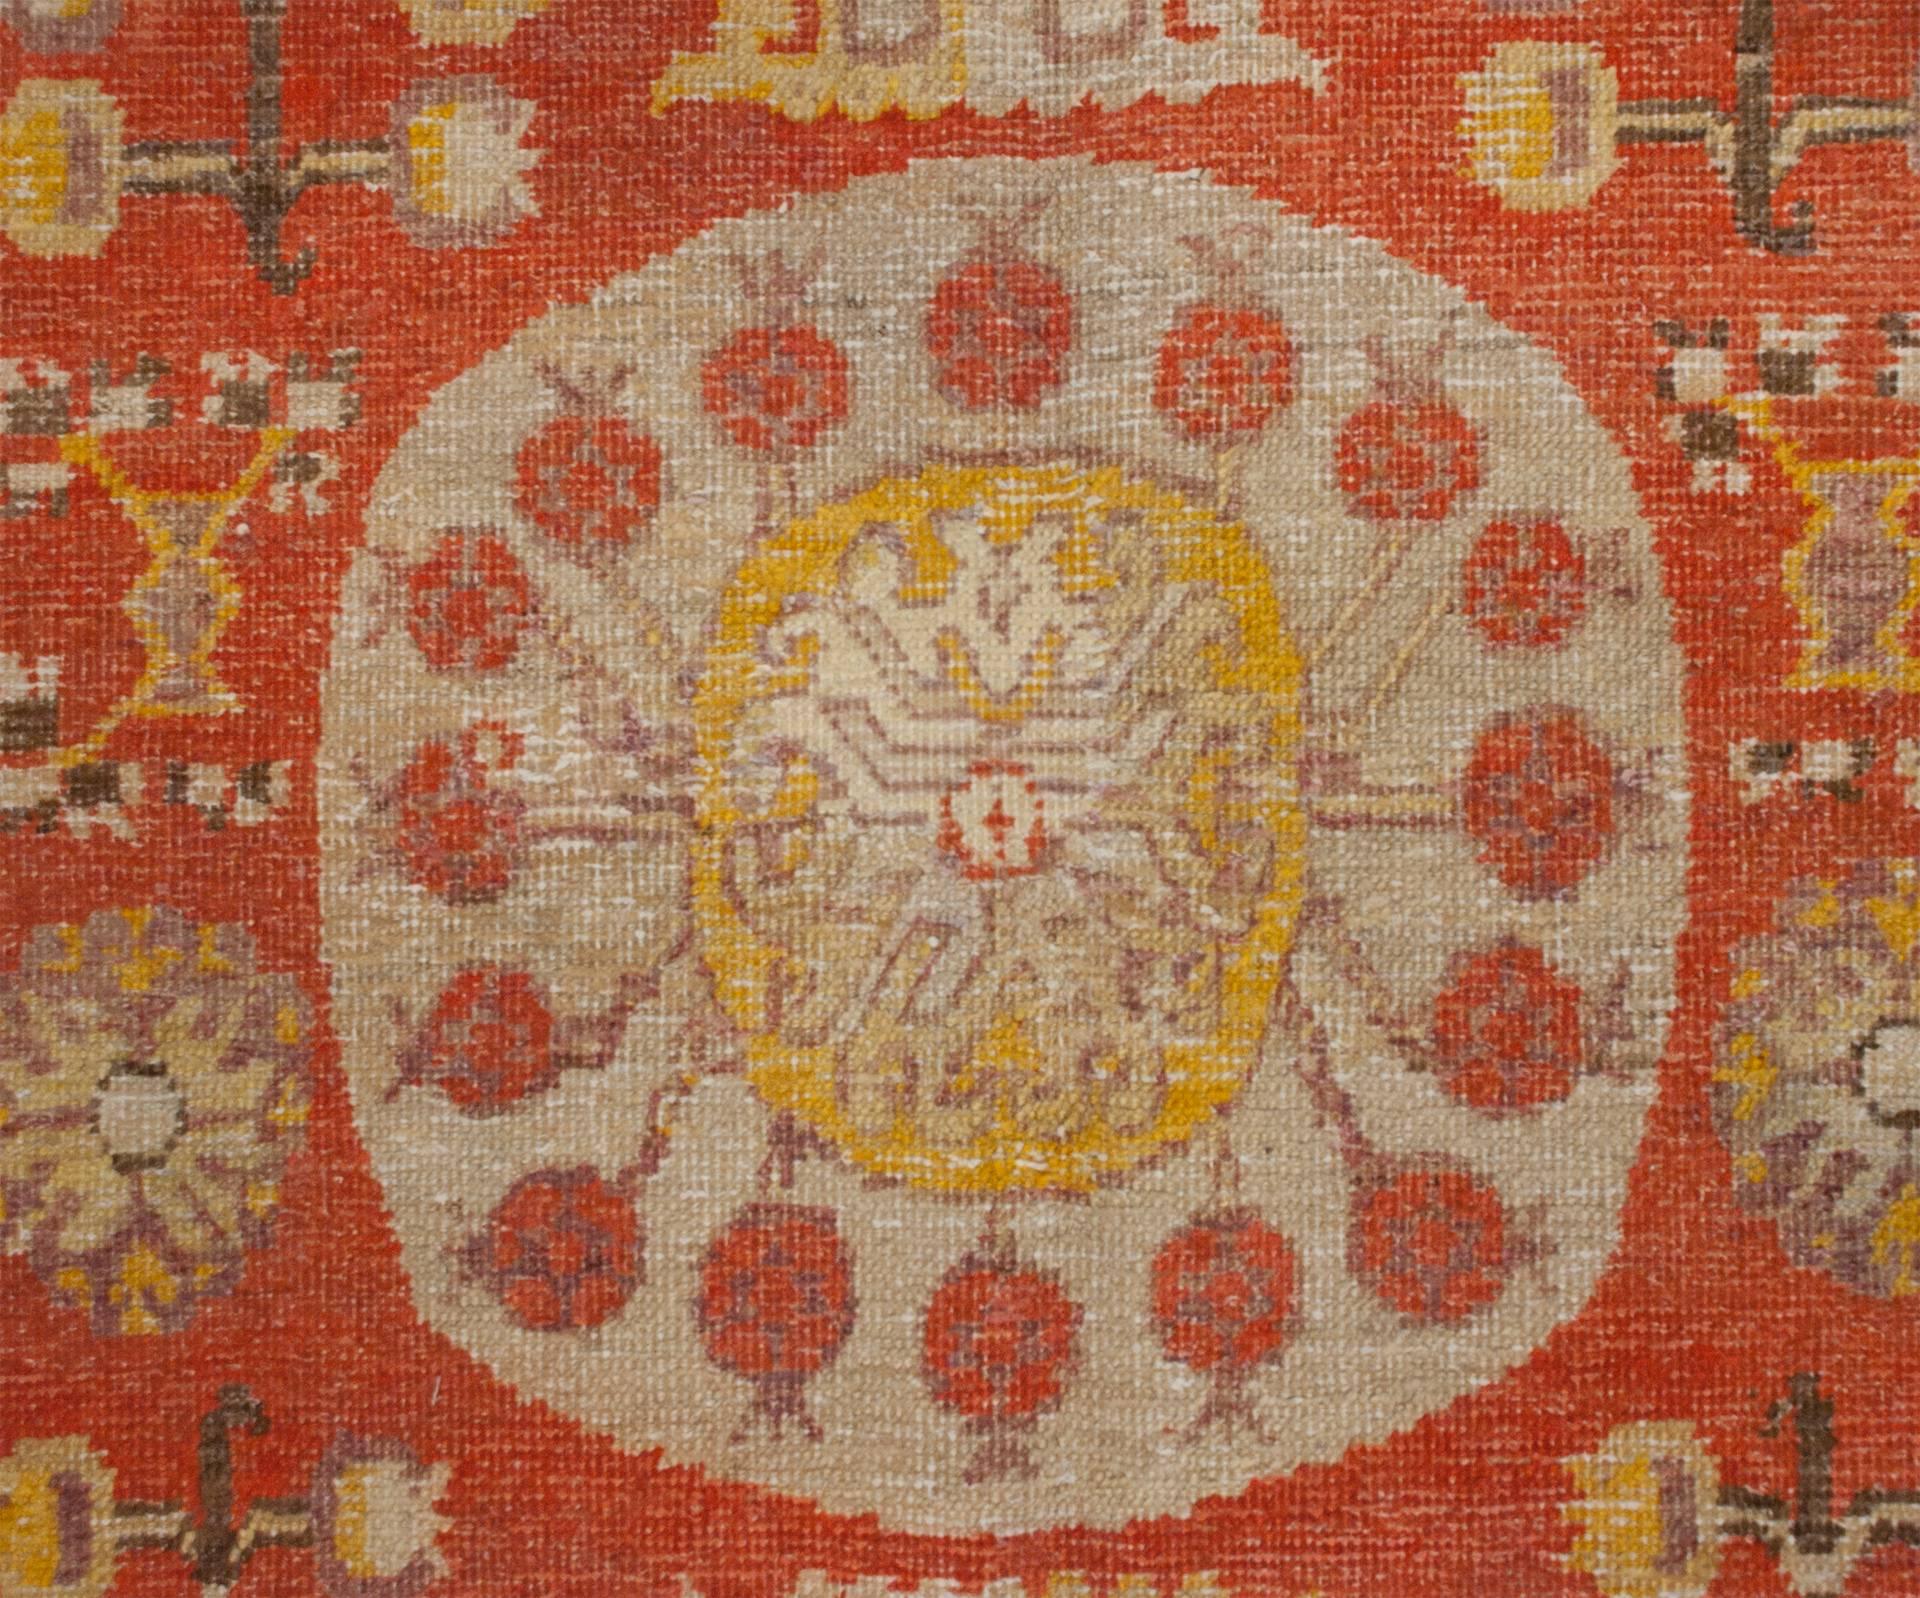 An early 20th century Central Asian Khotan rug with a wonderful large pale indigo central medallion with a pomegranate motif surrounding a gold floral center, on a rich crimson field of flowers and more pomegranates, surrounded by two distinct